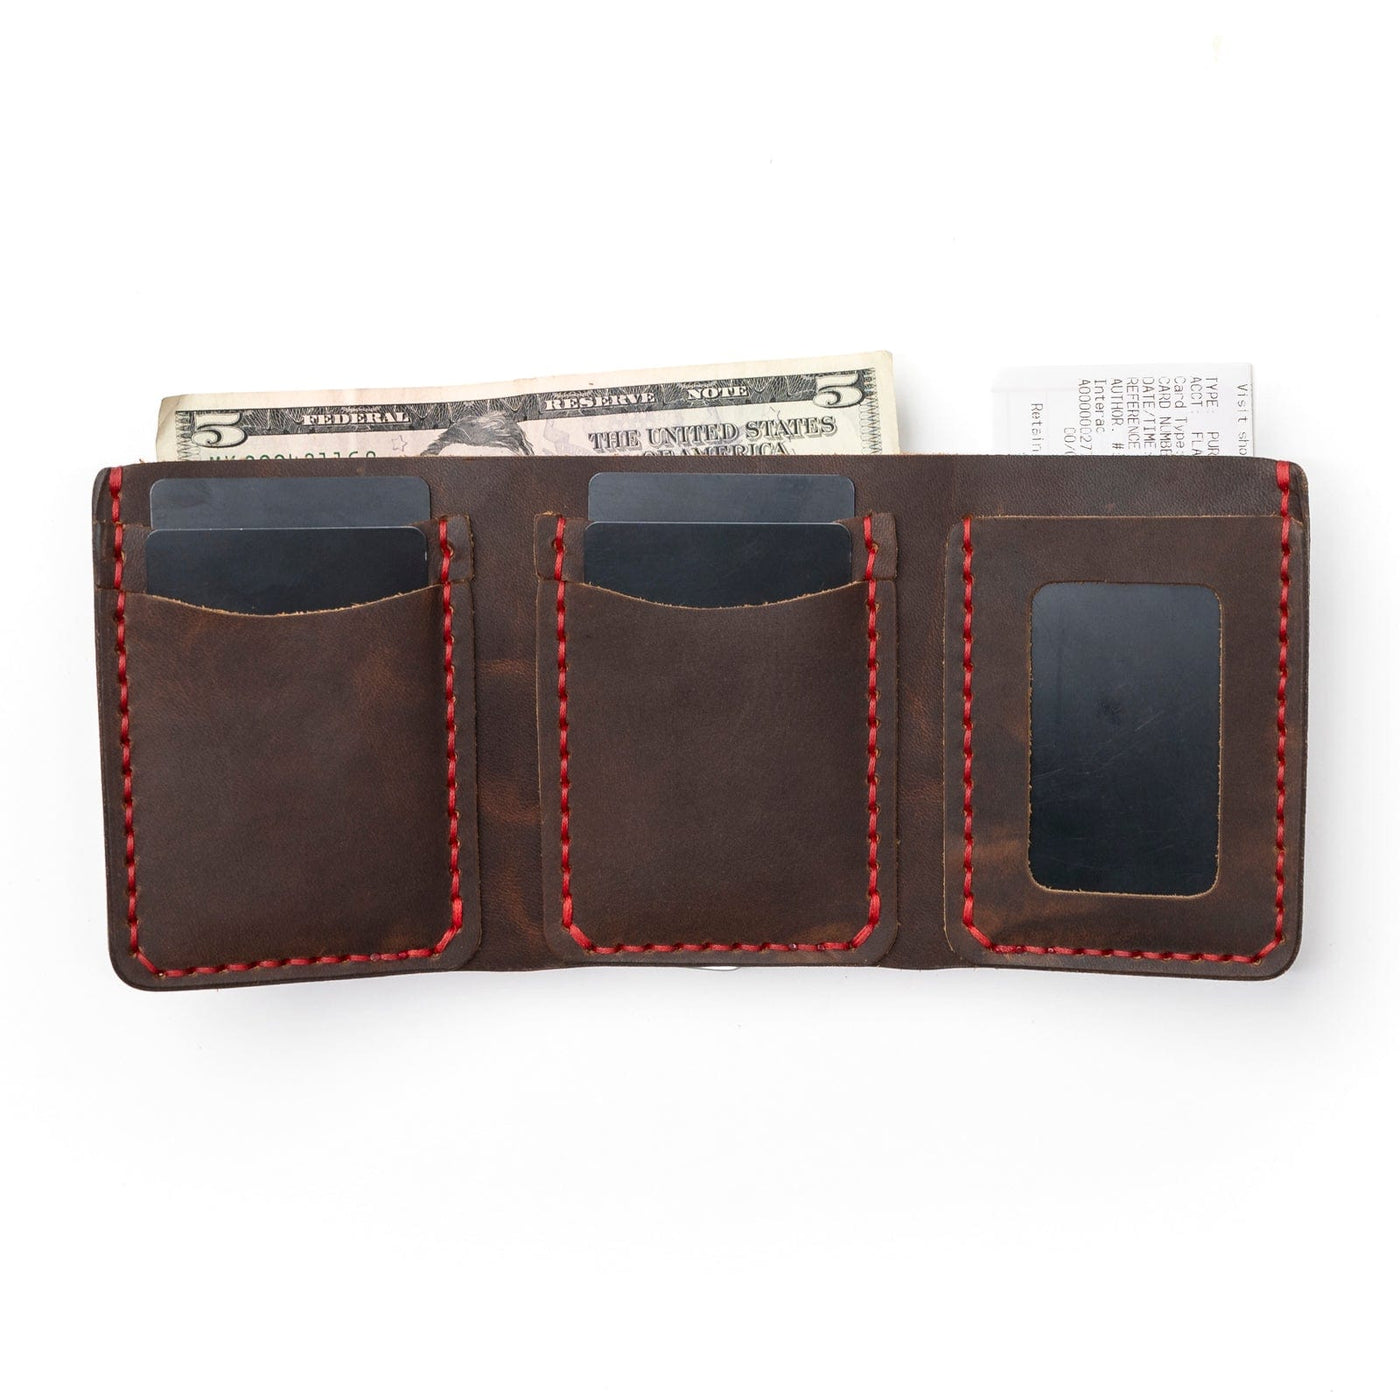 Heritage Brown Leather Trifold Wallet: Stylish and Functional - Popov ...